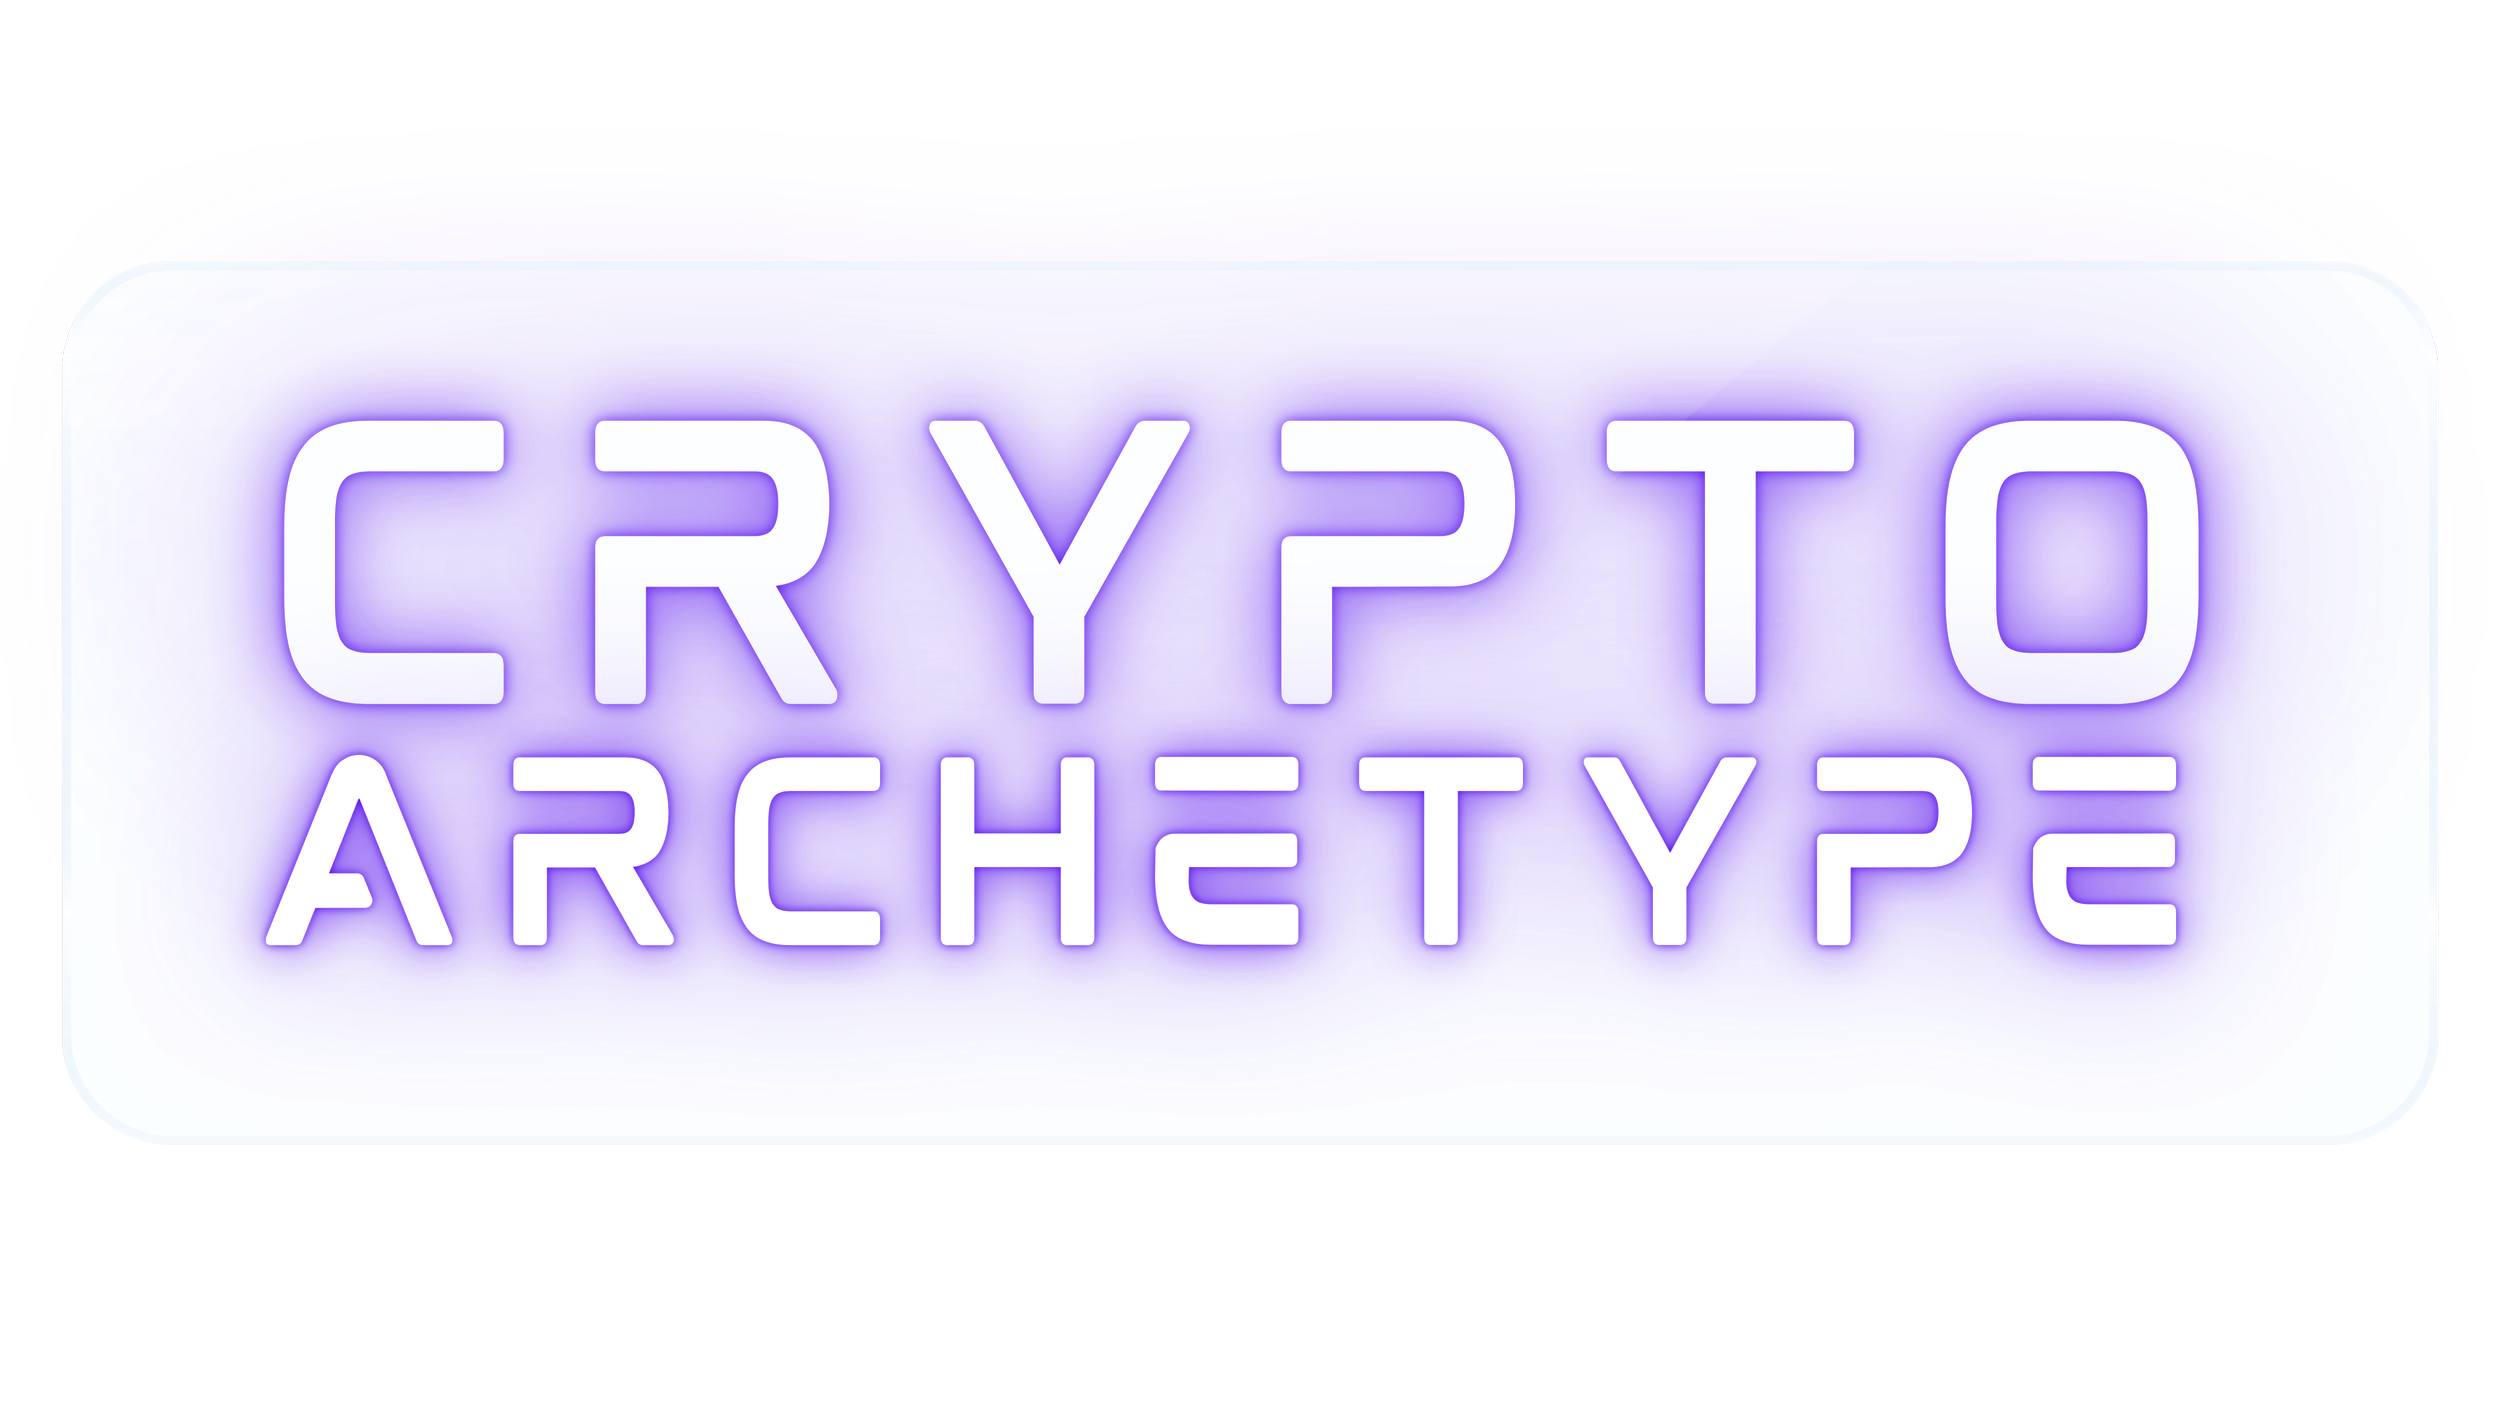 Archtype crypto tote betting vouchers for furniture